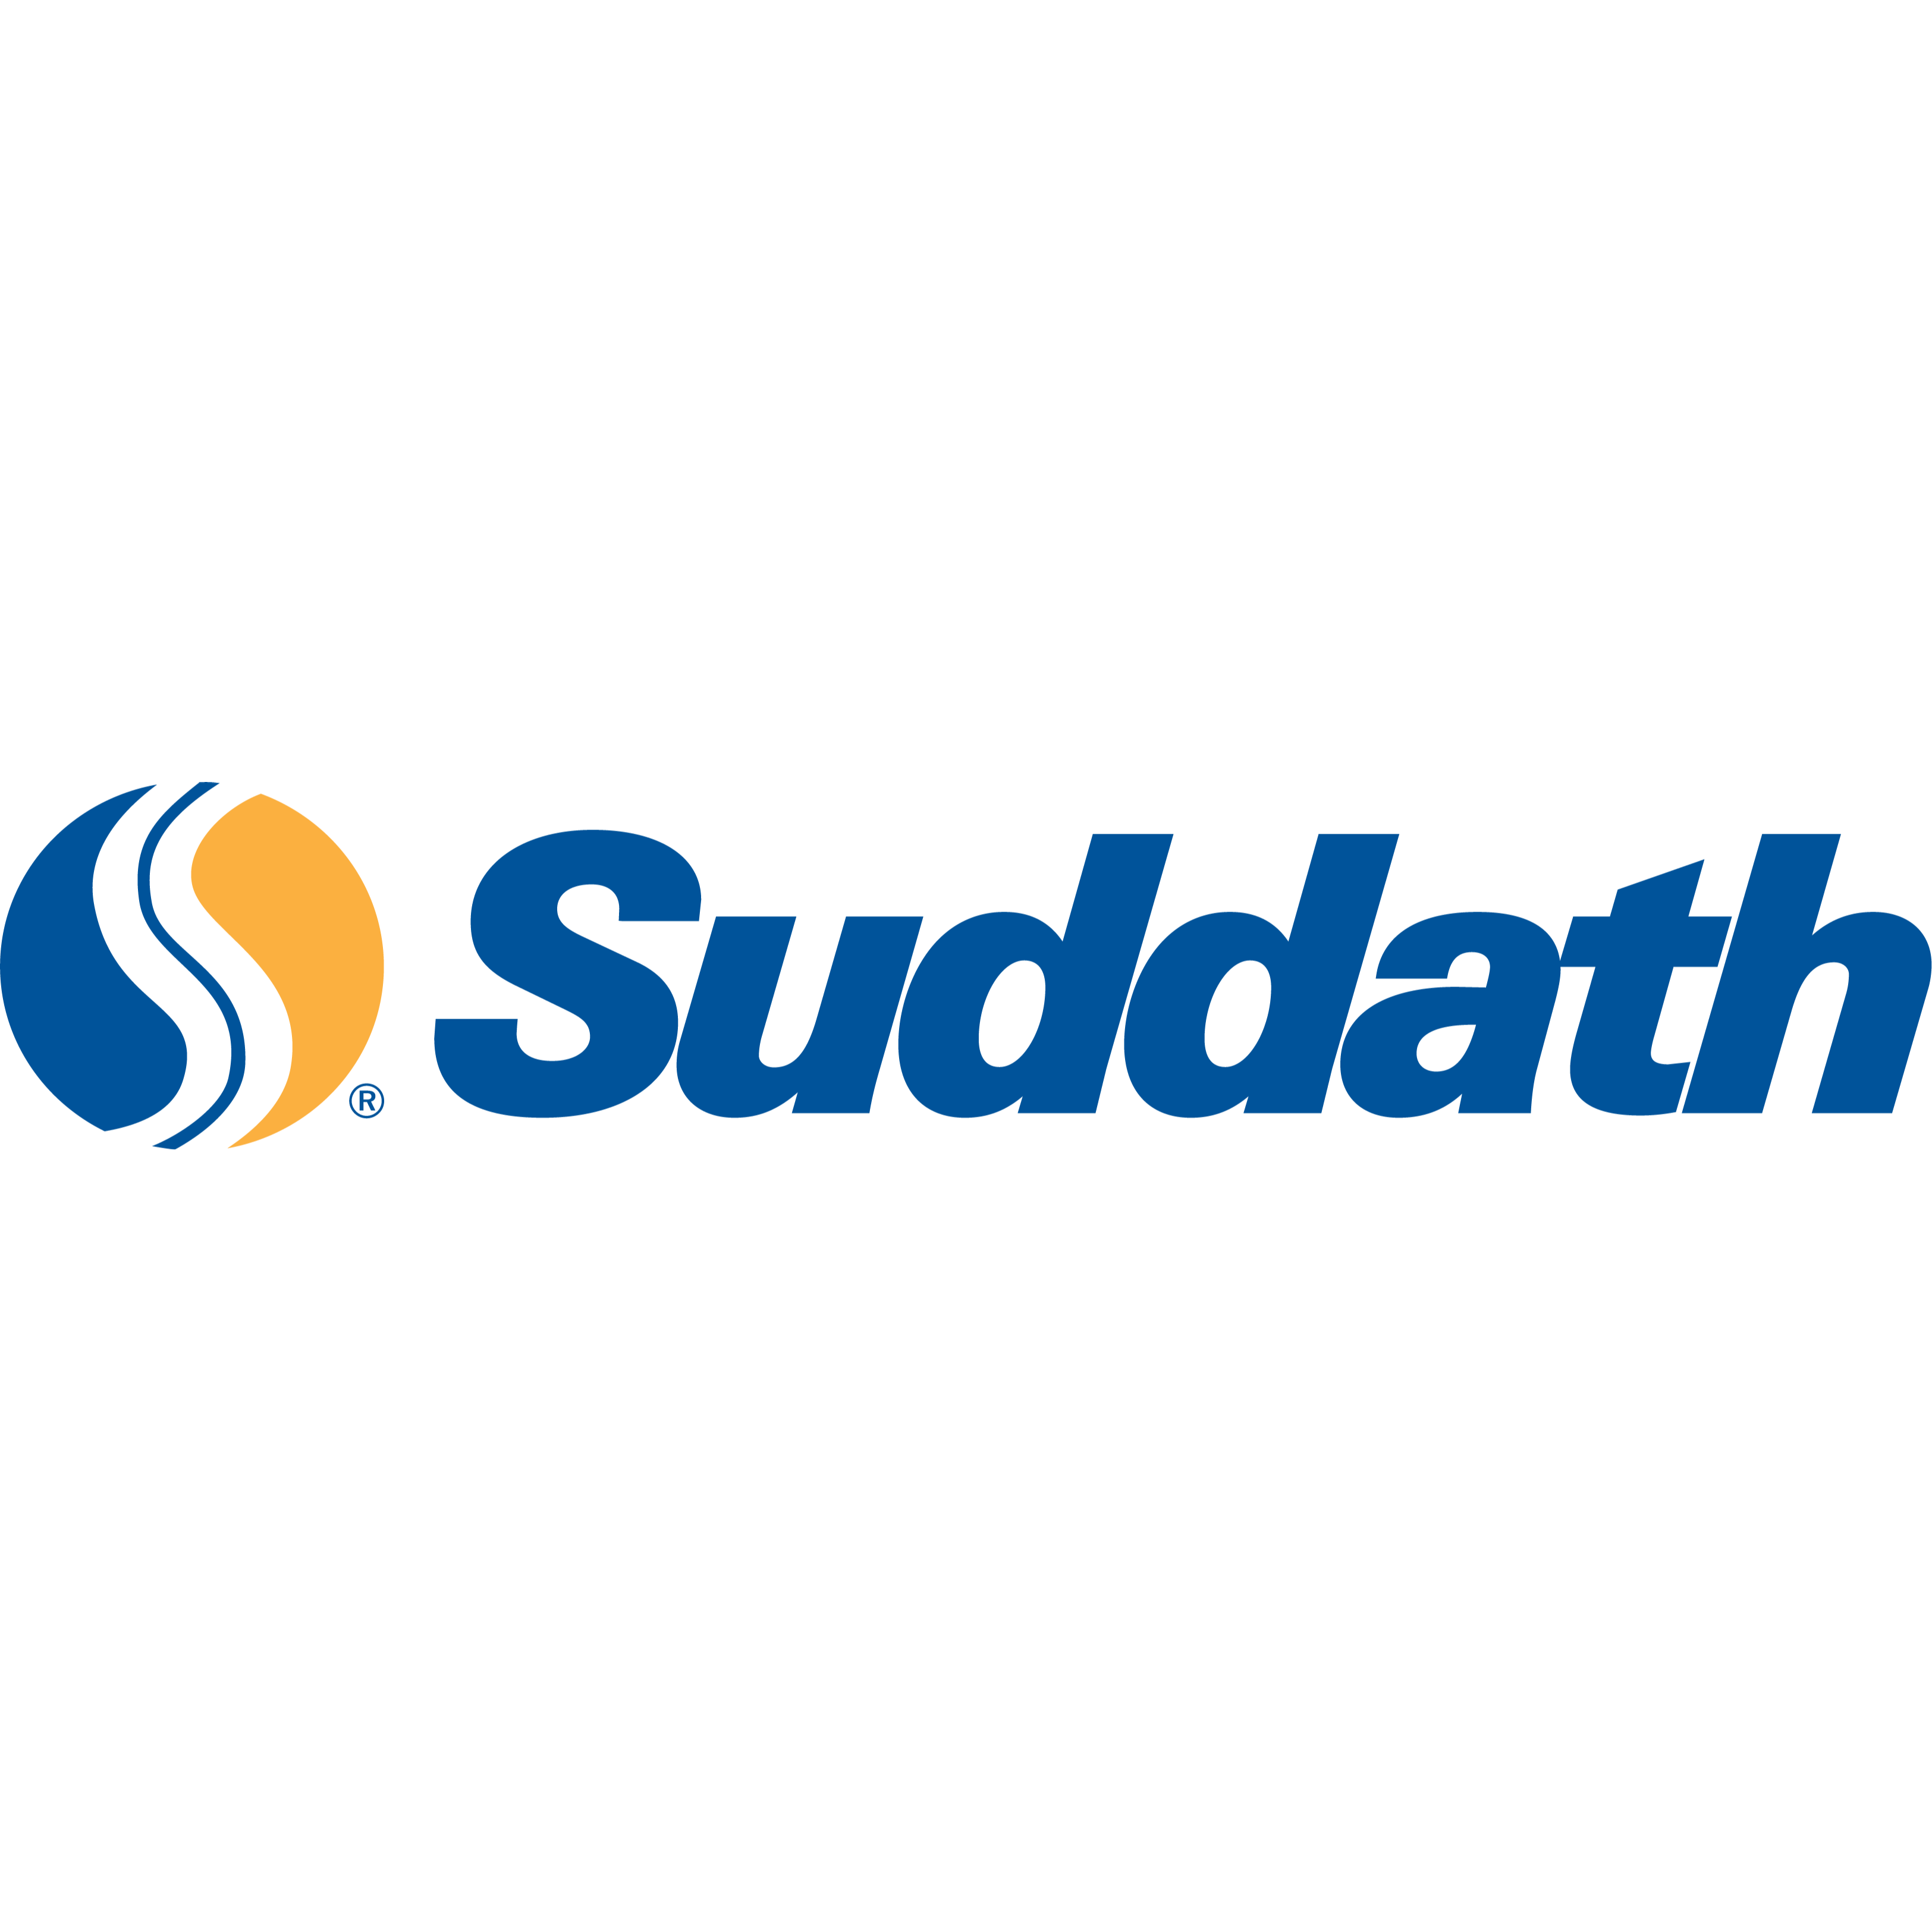 Suddath Relocation Systems of Oregon